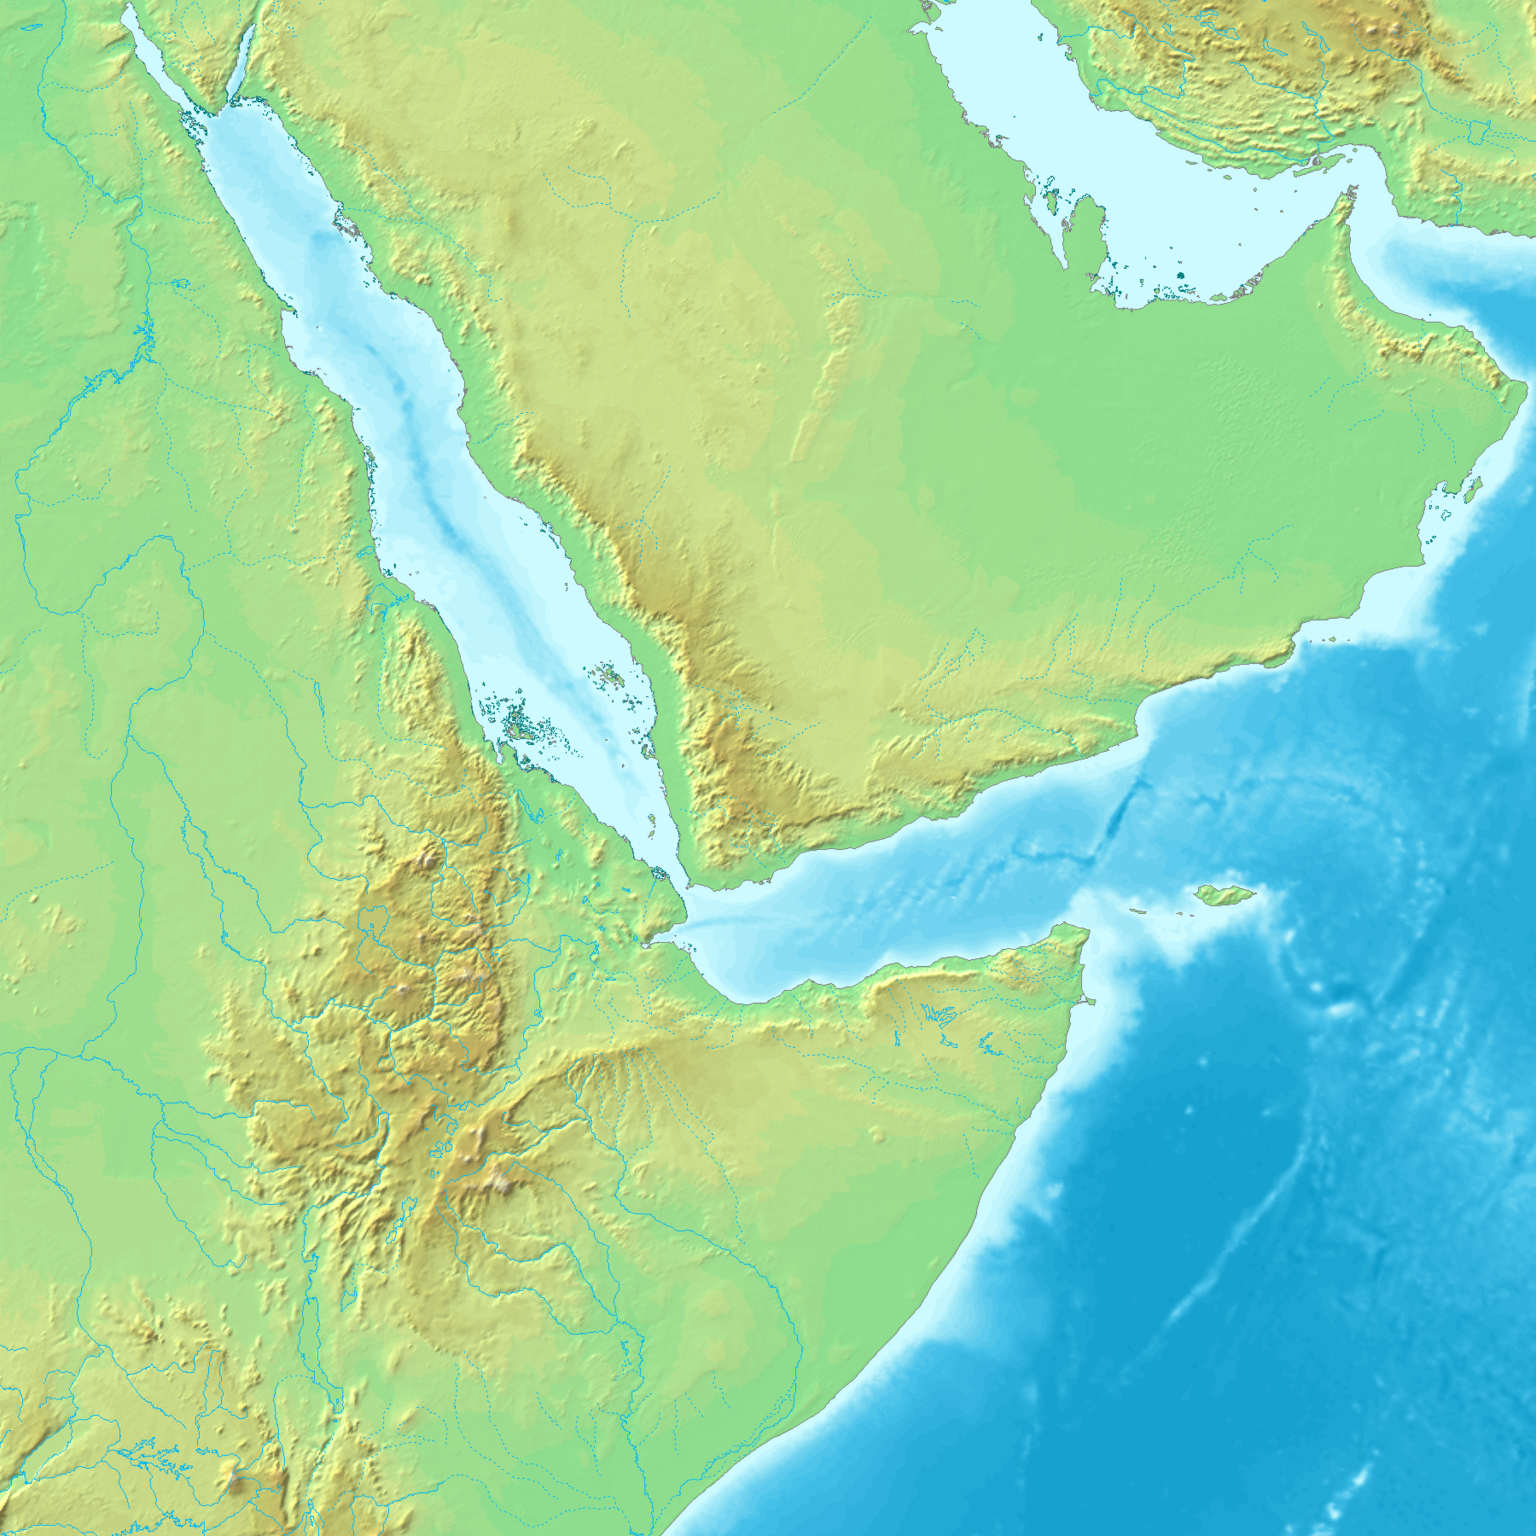 Topographic map showing the Afar Triangle, a low area bordering on the Red Sea. It is part of the Great Rift Valley in East Africa. The area overlaps the borders of Eritrea, Djibouti and the entire Afar region of Ethiopia. The connecting three arms form a triple junction. The northernmost branching arm extends north through the Red Sea and into the Dead Sea, while the eastern arm extends through the Gulf of Aden and connects to the Mid-Indian Ocean ridge further to the east. Both of these rifting arms are below sea level and are similar to a mid-ocean ridge. The third rifting arm runs south through the countries of Kenya, Uganda, the Democratic Republic of Congo, Rwanda, Burundi, Tanzania, Zambia, Malawi and Mozambique.